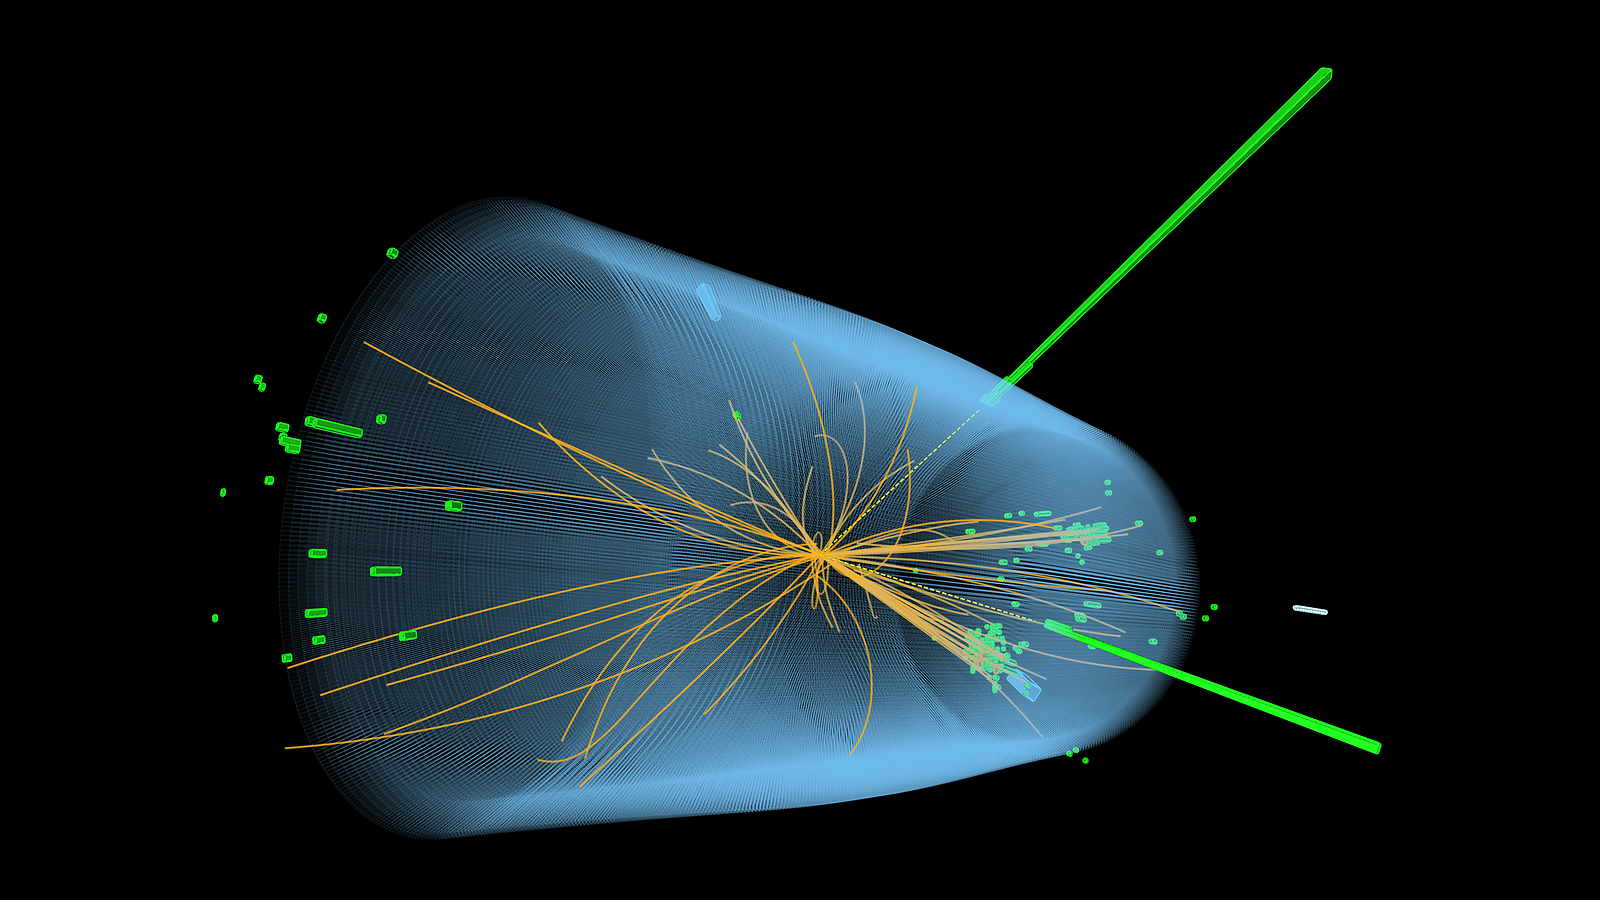 Visualization of a particle collision